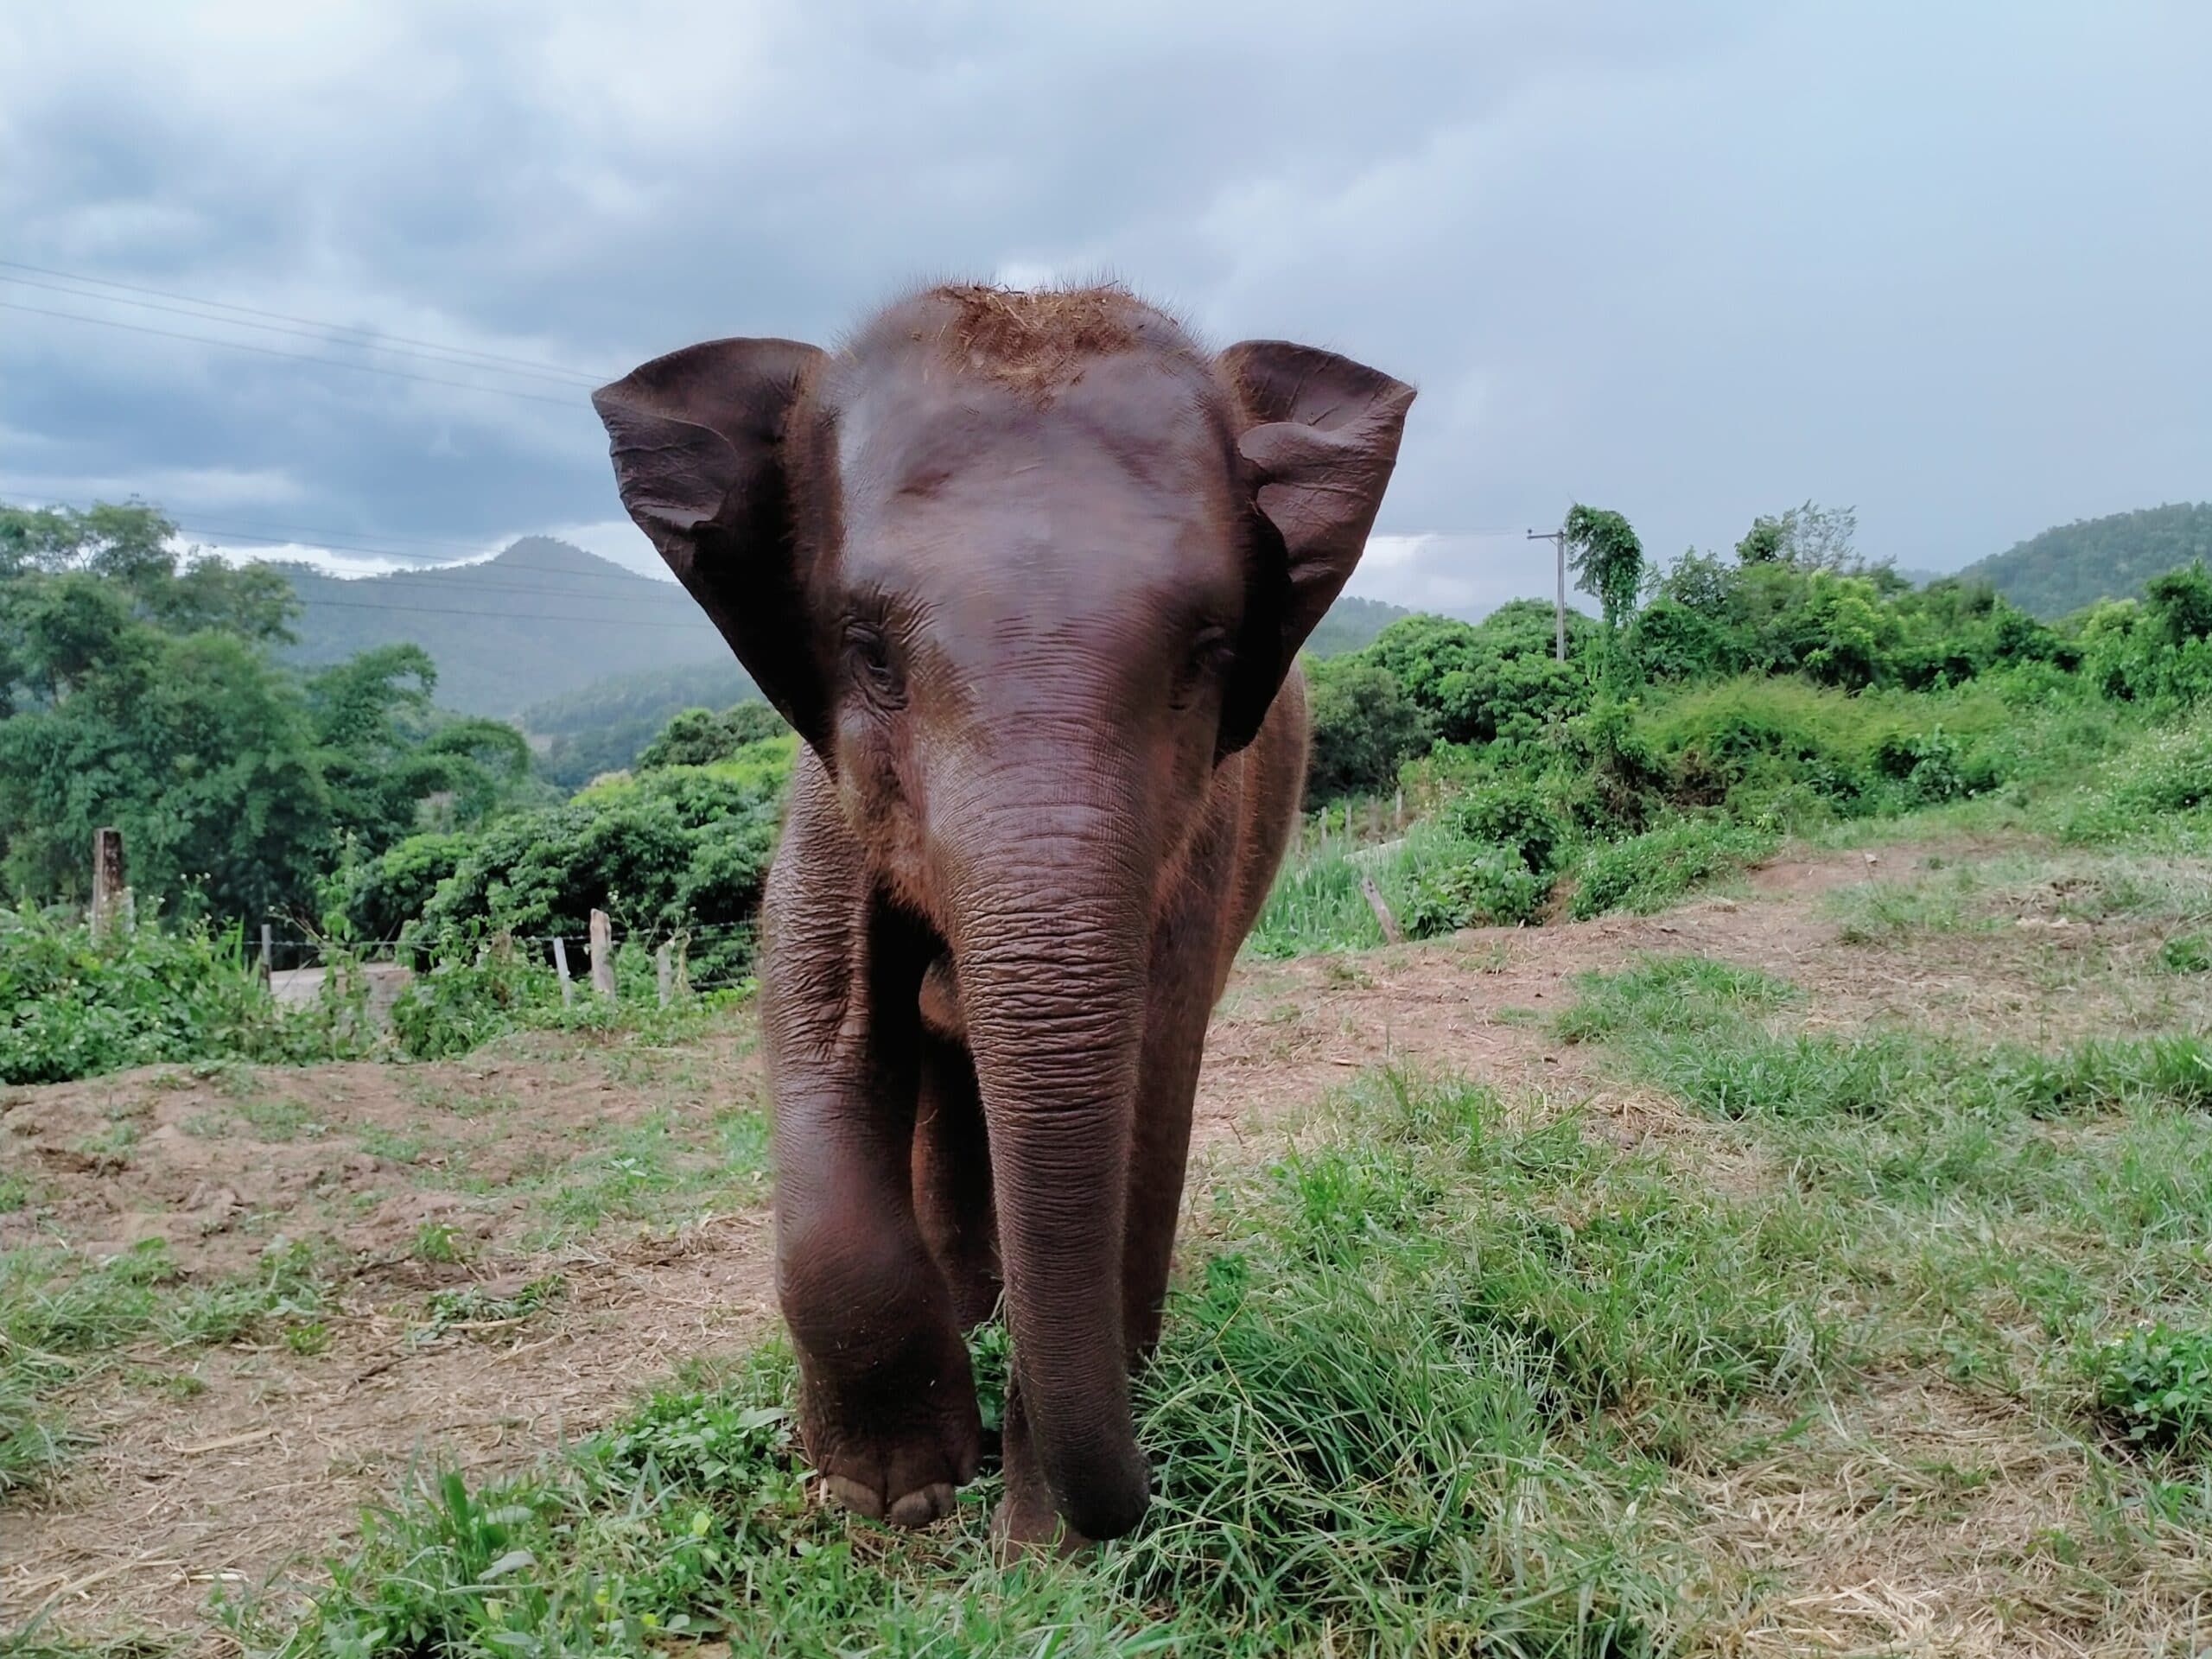 A beautiful elephant facing the camera with it's ears flapping